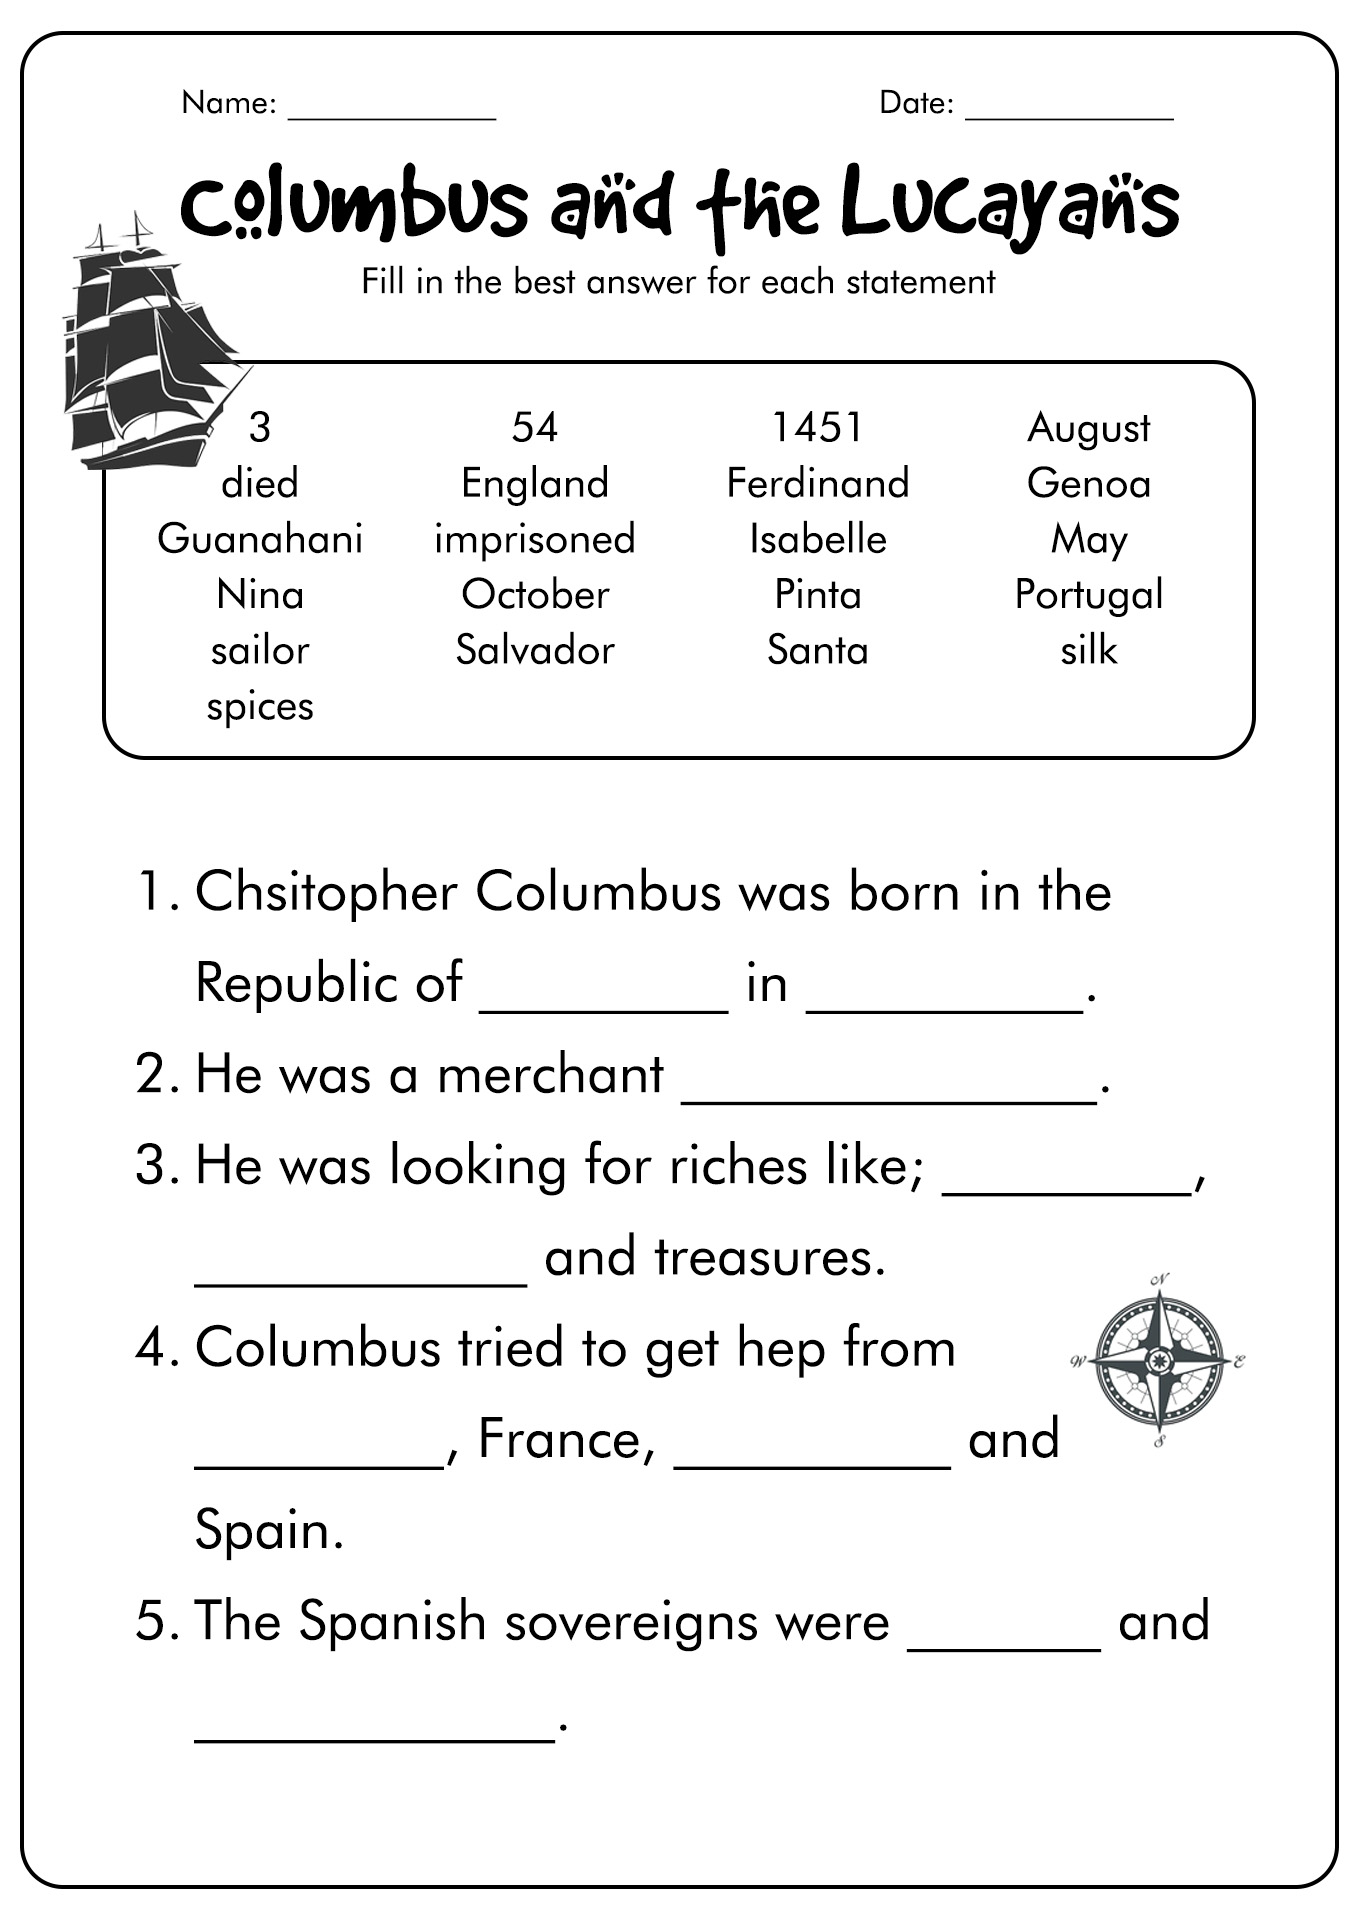 13-best-images-of-christopher-columbus-kindergarten-worksheets-christopher-columbus-activities